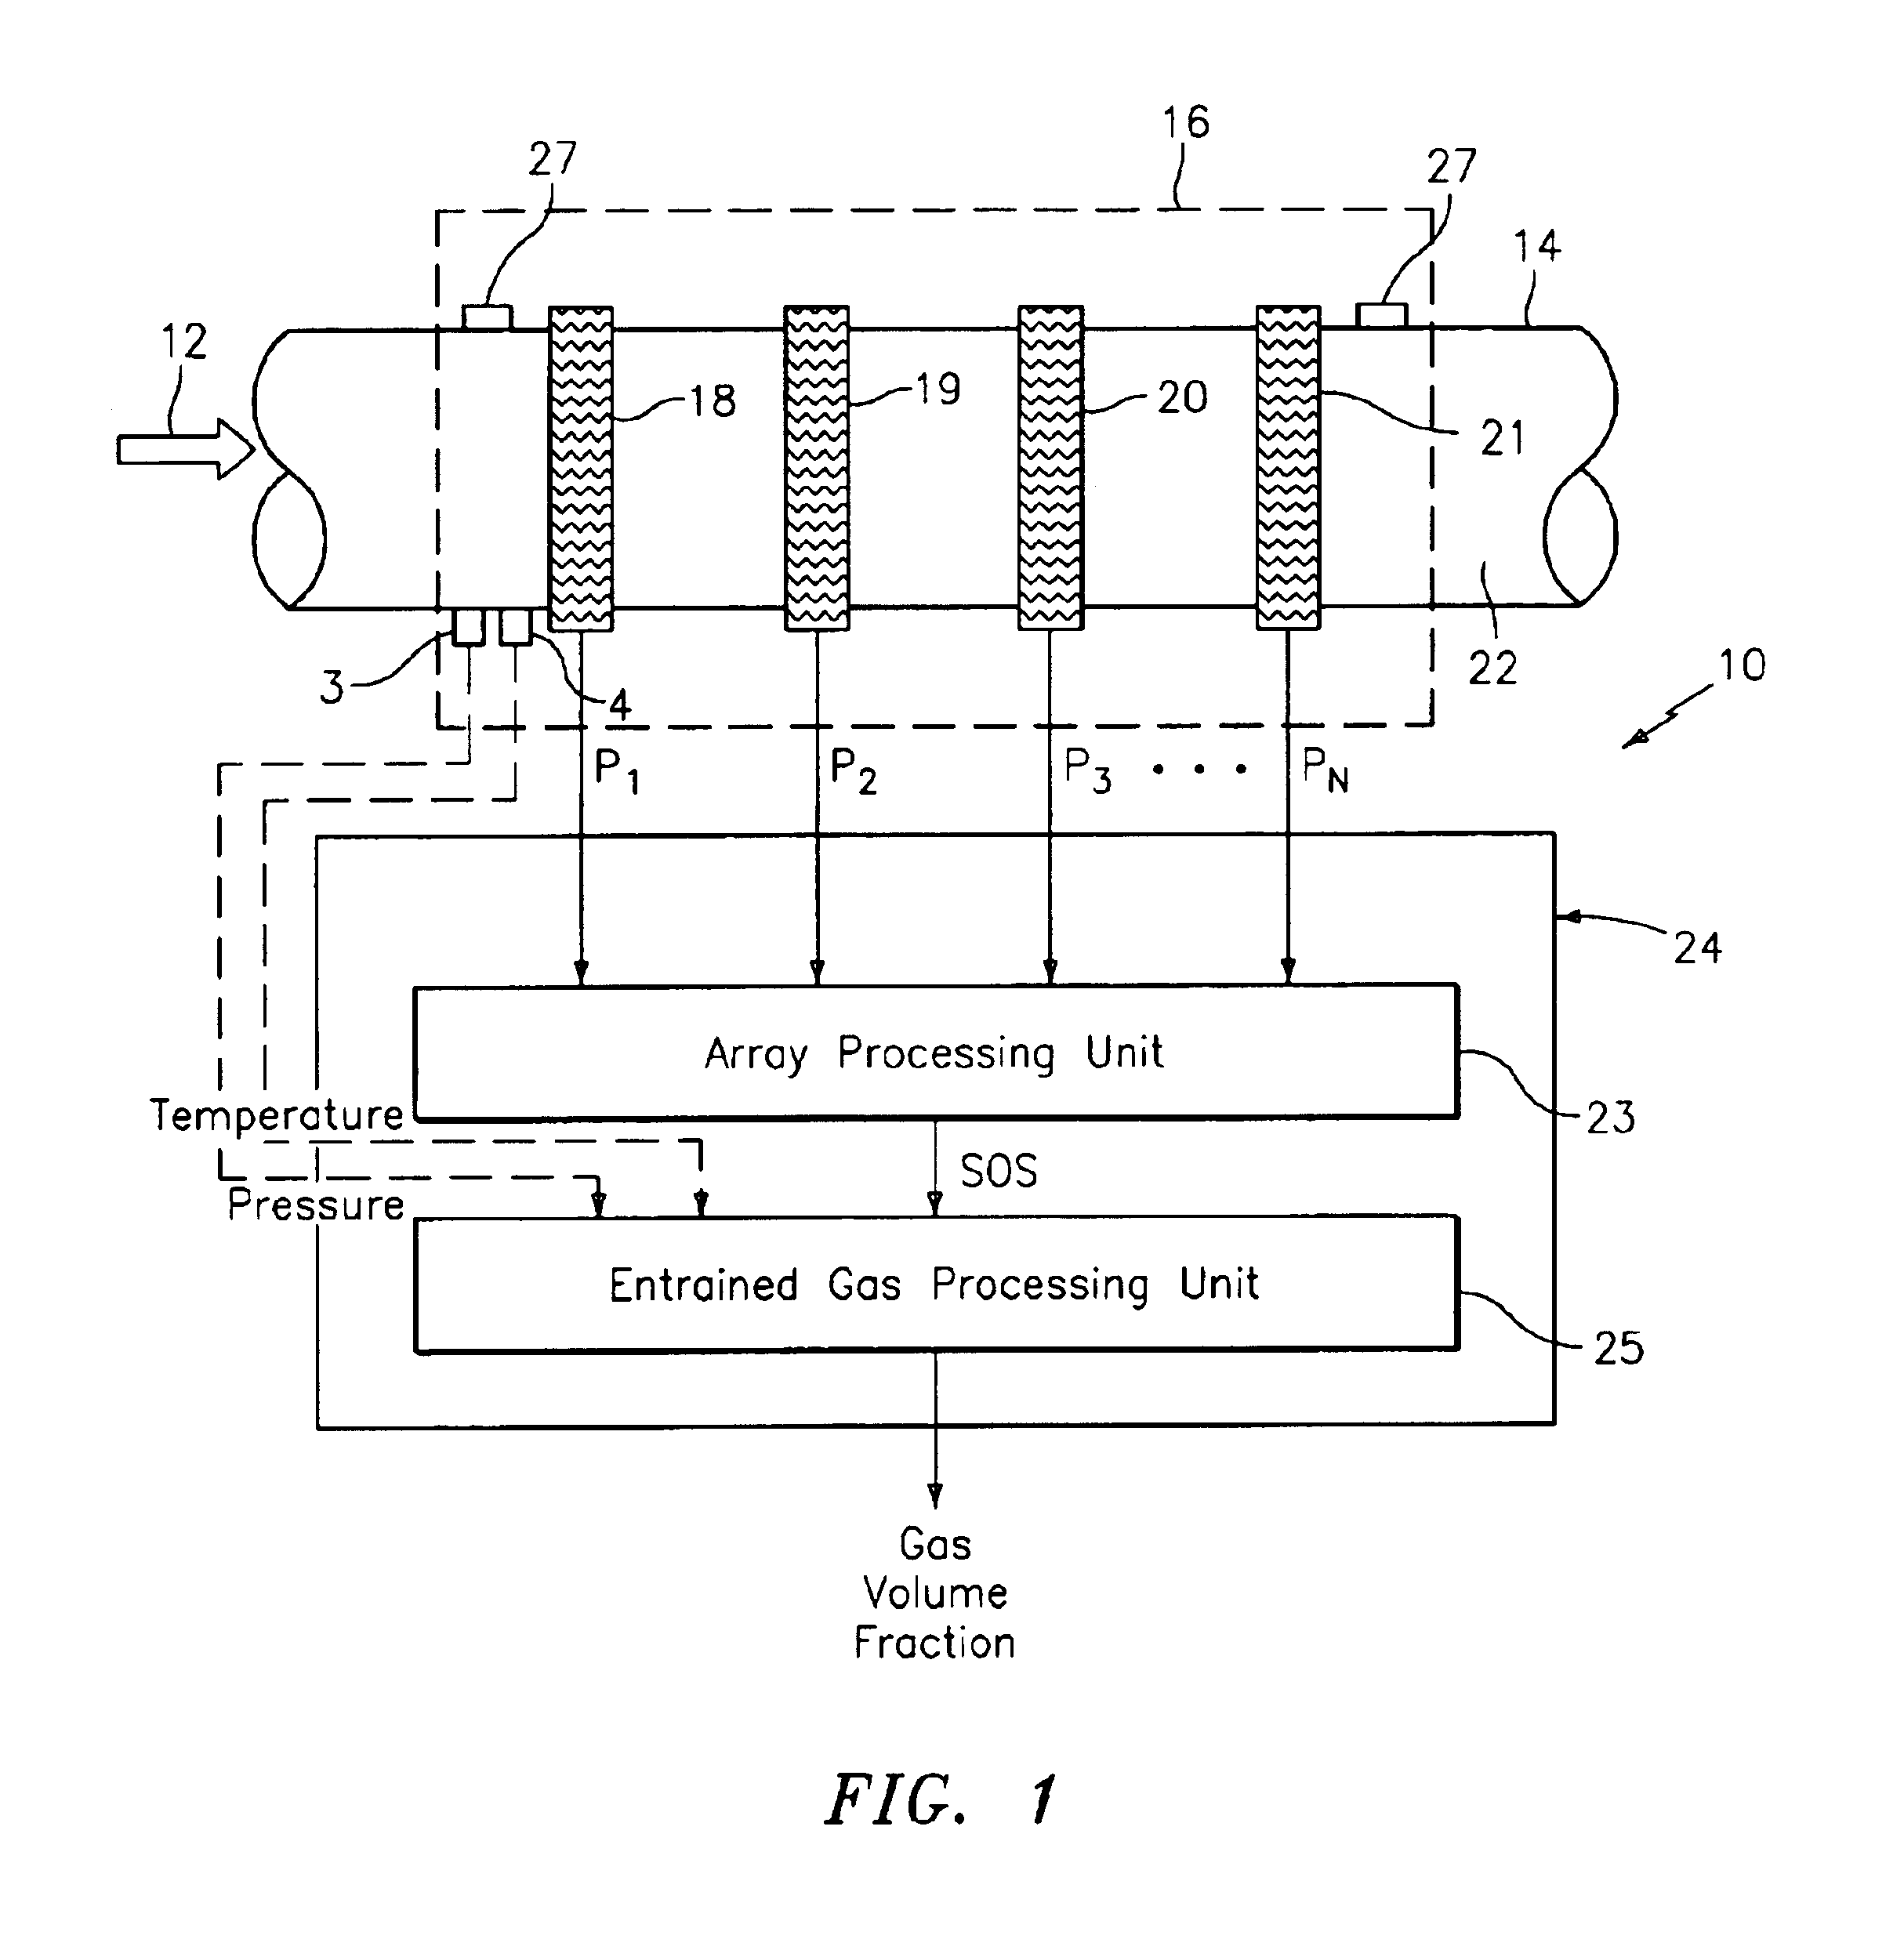 Apparatus and method of measuring gas volume fraction of a fluid flowing within a pipe